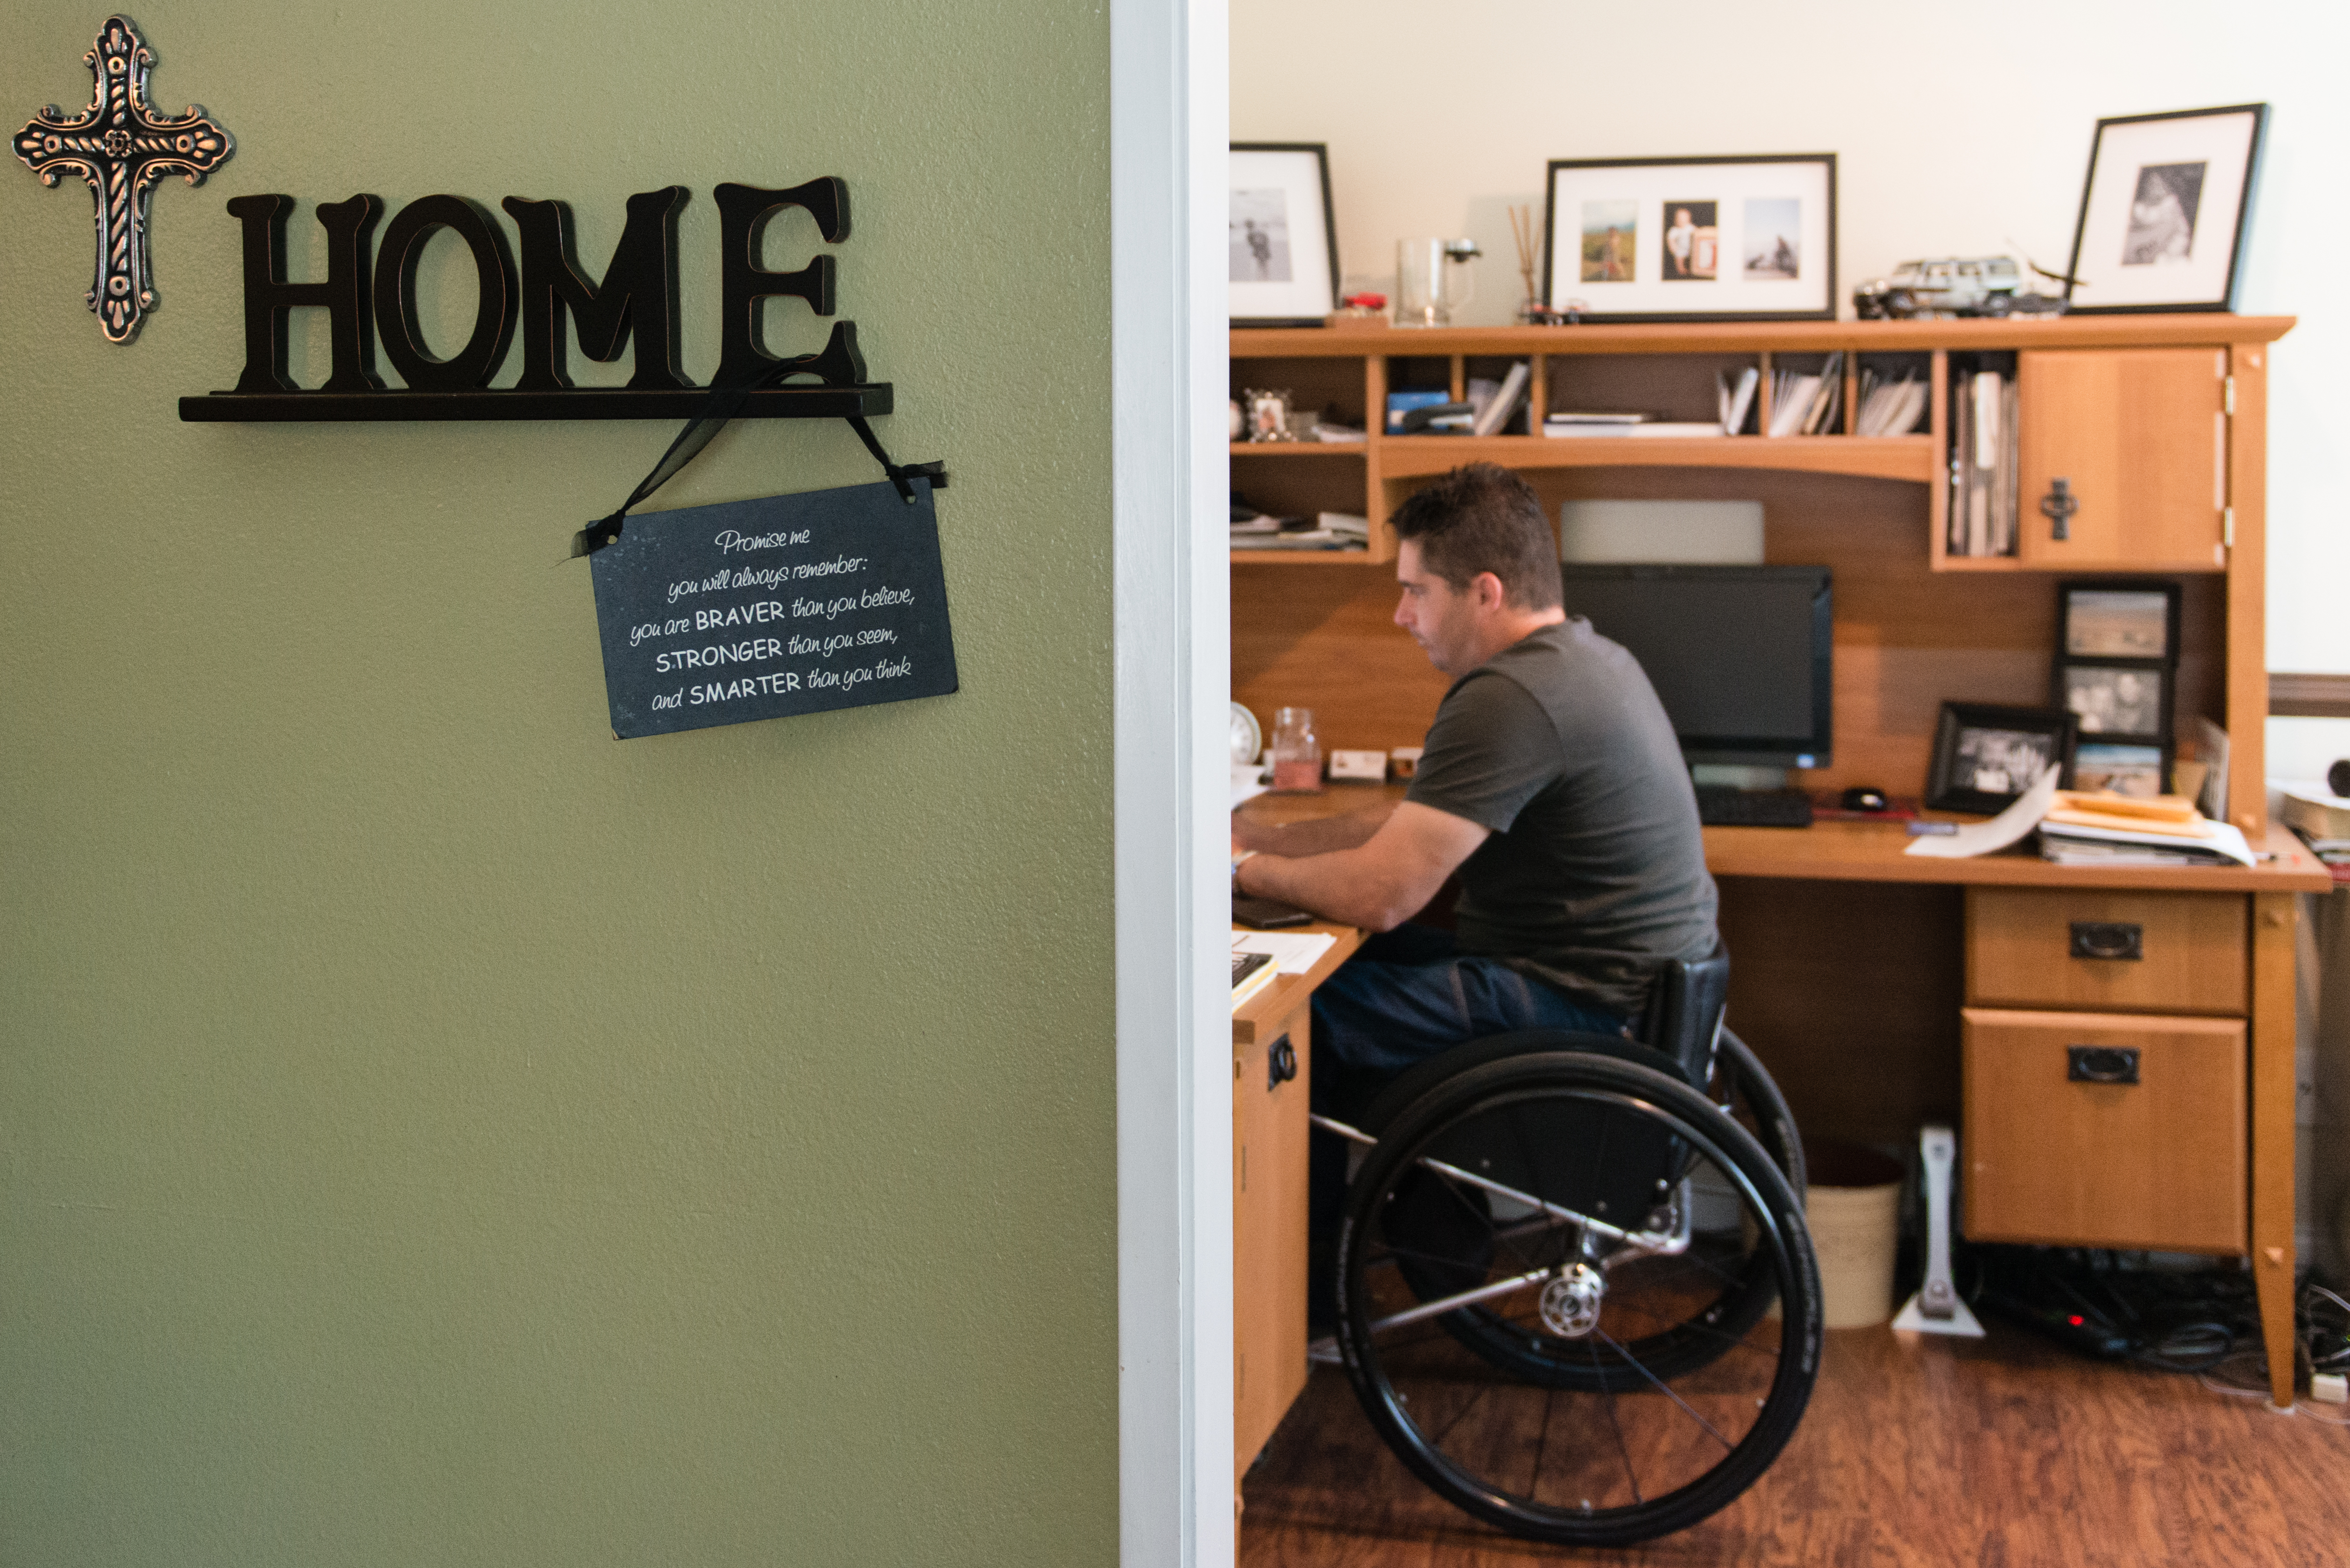 Anthony R. Orefice, 40, owns a medical supply business and works from home. Orefice says his faith helped him get through the initial depression of being paralyzed (Photo by Heidi de Marco/KHN).